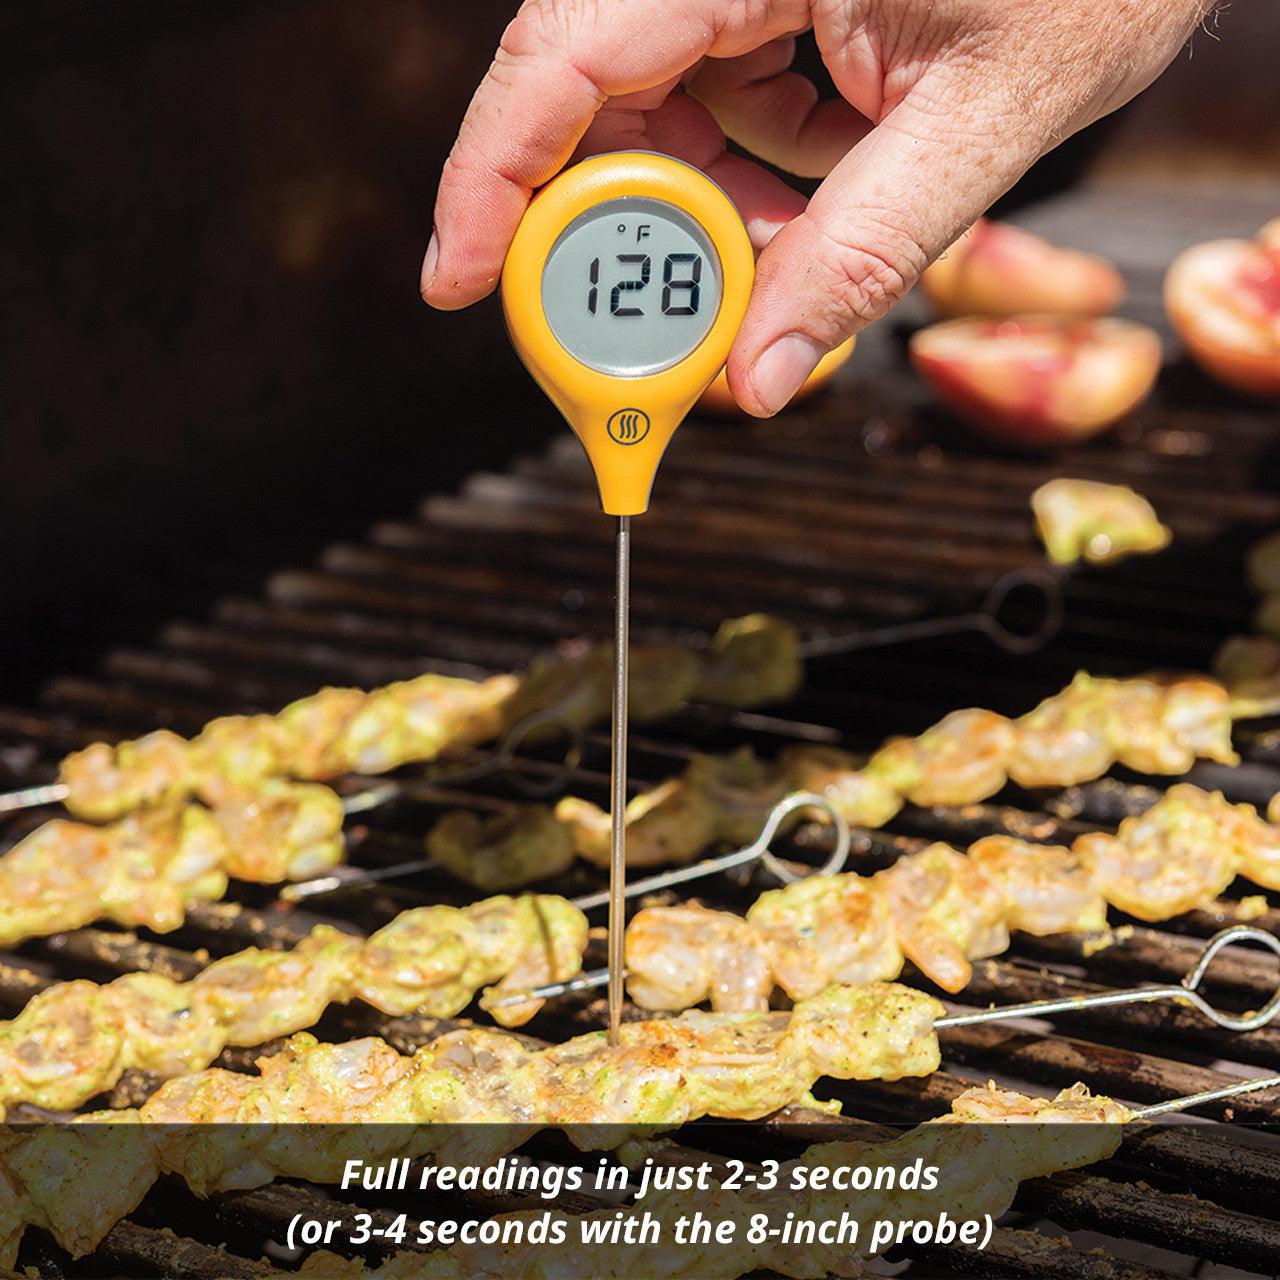 Thermoworks Thermapen One on Sale 2022